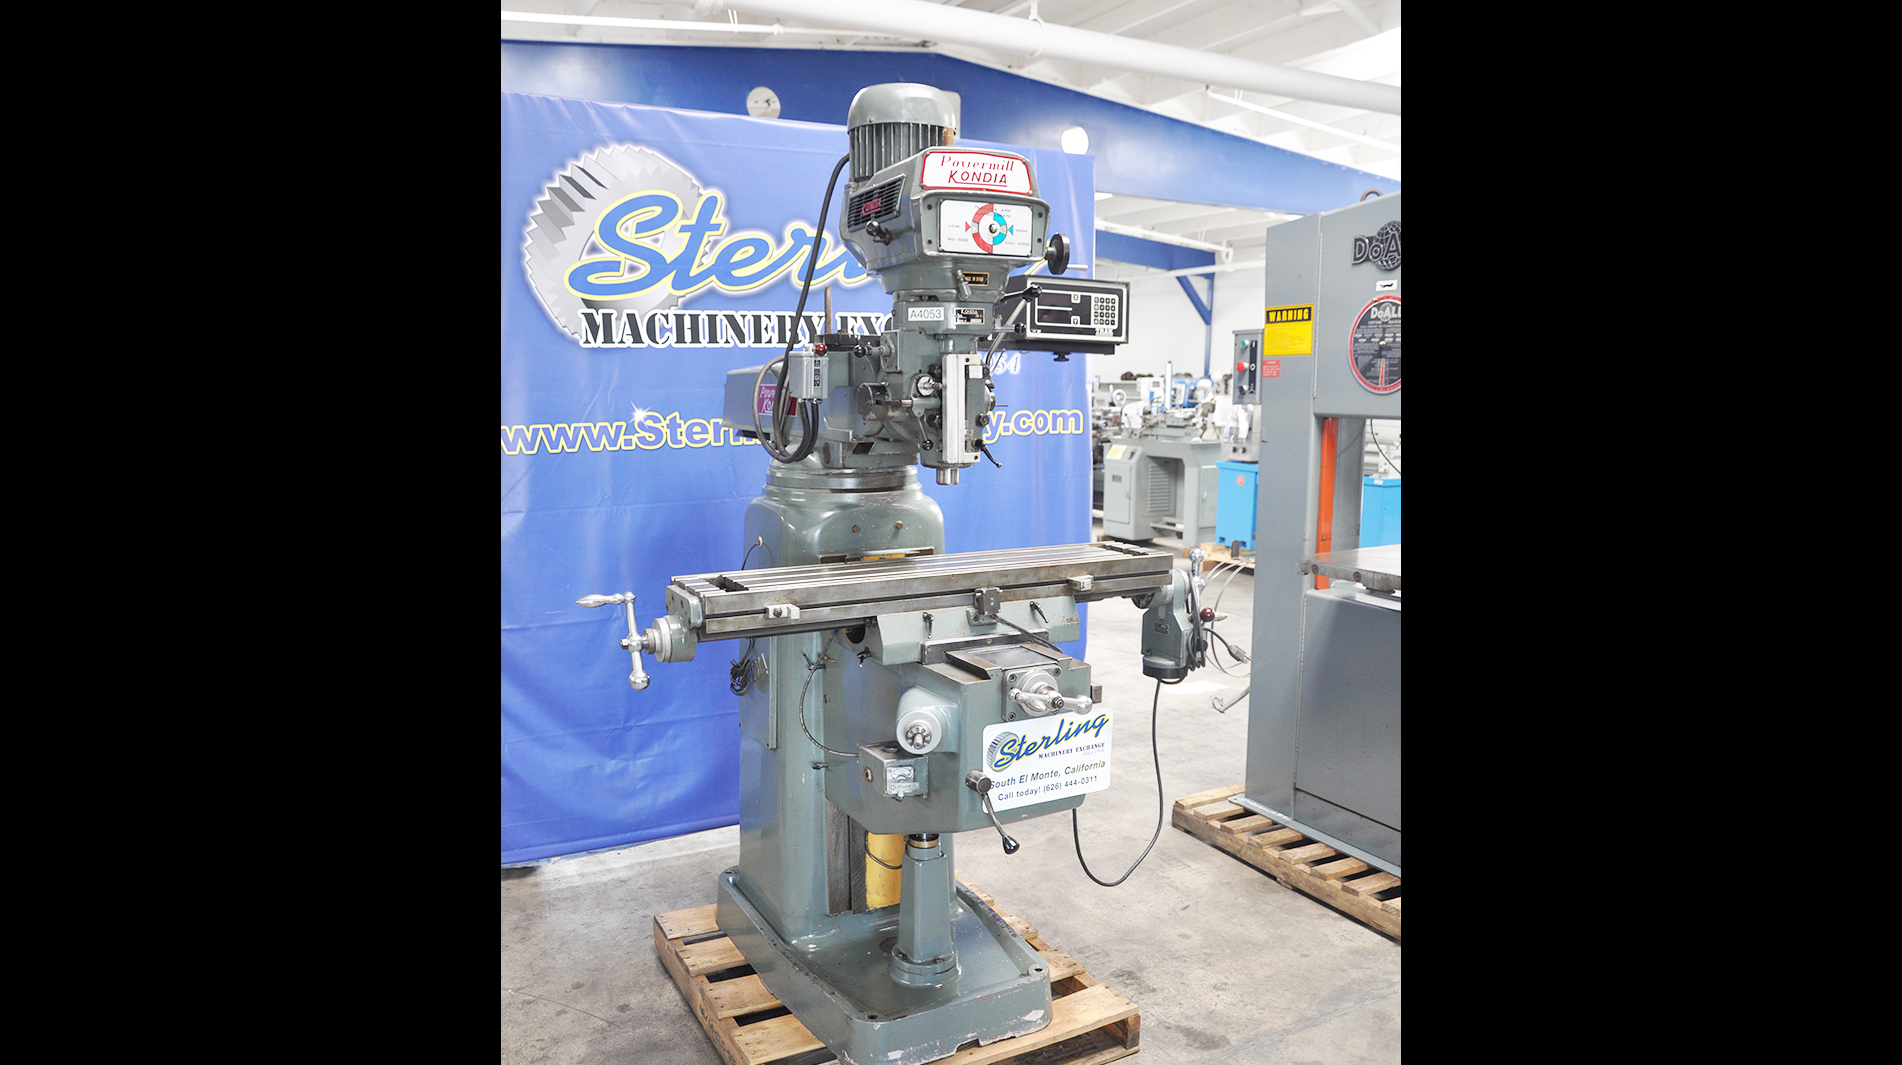 Kondia-9 "x 42" Used Kondia fresadora vertical con Variable Jefe velocidad, MDL. FV-1, One Shot Lube, raspado y Chrome maneras, Jefe de velocidad variable, Trak 2 Eje lectura digital, X-Axis Tabla Power Feed, # A4053-01